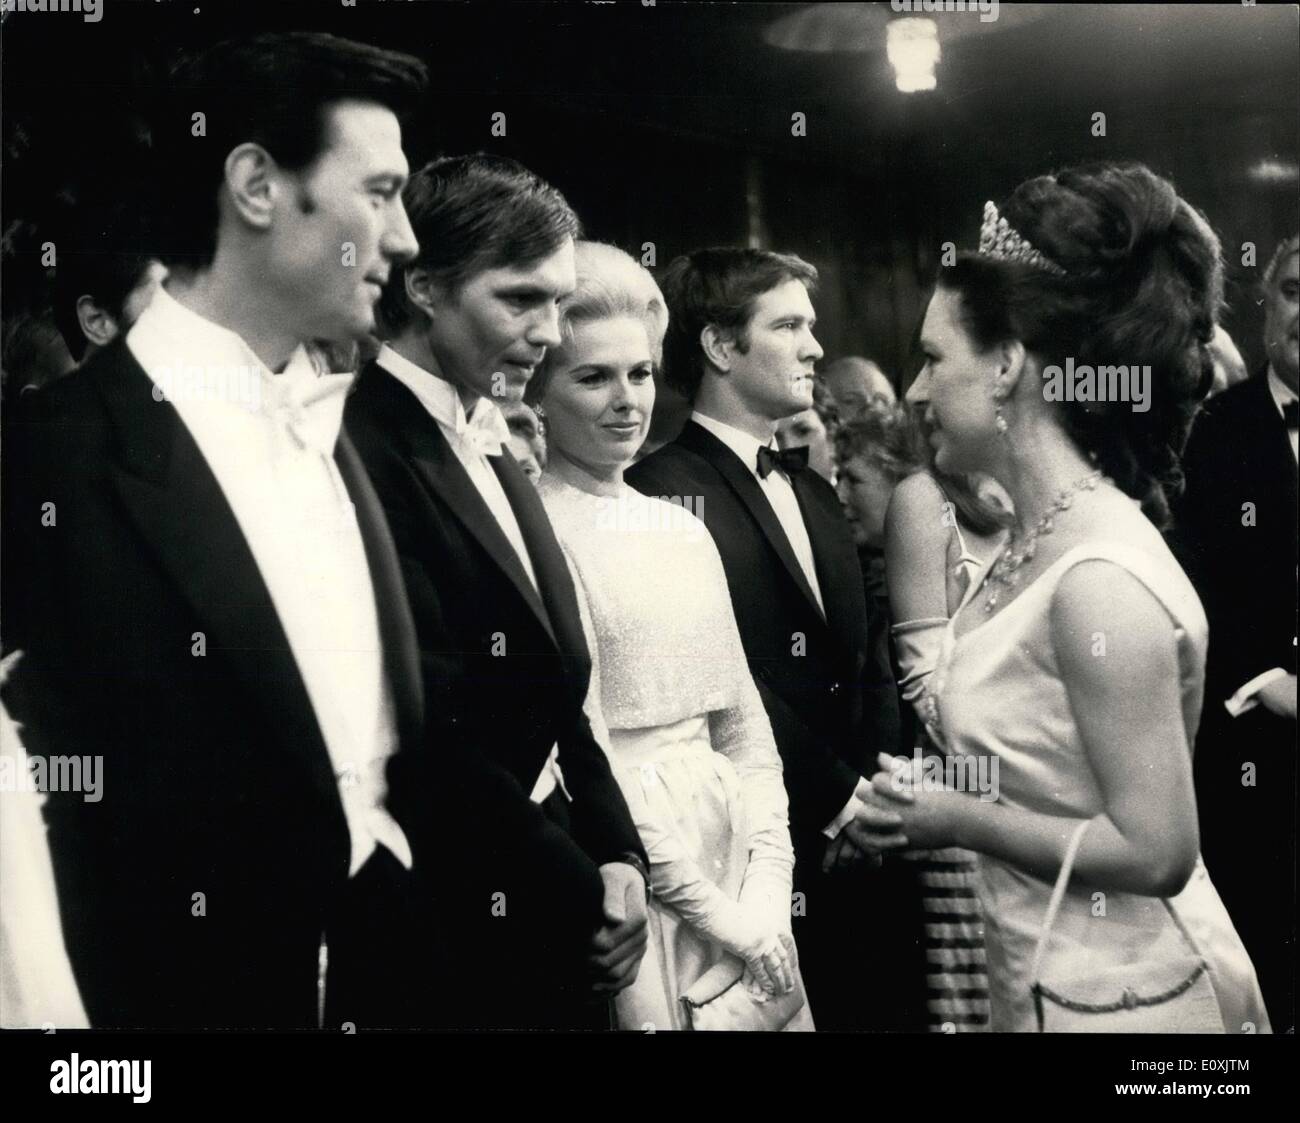 Feb. 02, 1967 - Princess Margaret attends Royal Film Performance.: H.R.H. Princess Margaret this evening attended the 1967 Royal Film Performance, of the film ''The Taming of the Shrew'',starring ELizabeth Taylor and Richard Burton, at the Odeon Theatre, Leicester Square, London o aid the Cinema and Television, Benevolent Fund. Photo shows Princess Margaret seen speaking to Per Oscarsson of Sweden, who is an actor, On his left is Laurence Harvey, and on right is Martha Hyer. Stock Photo